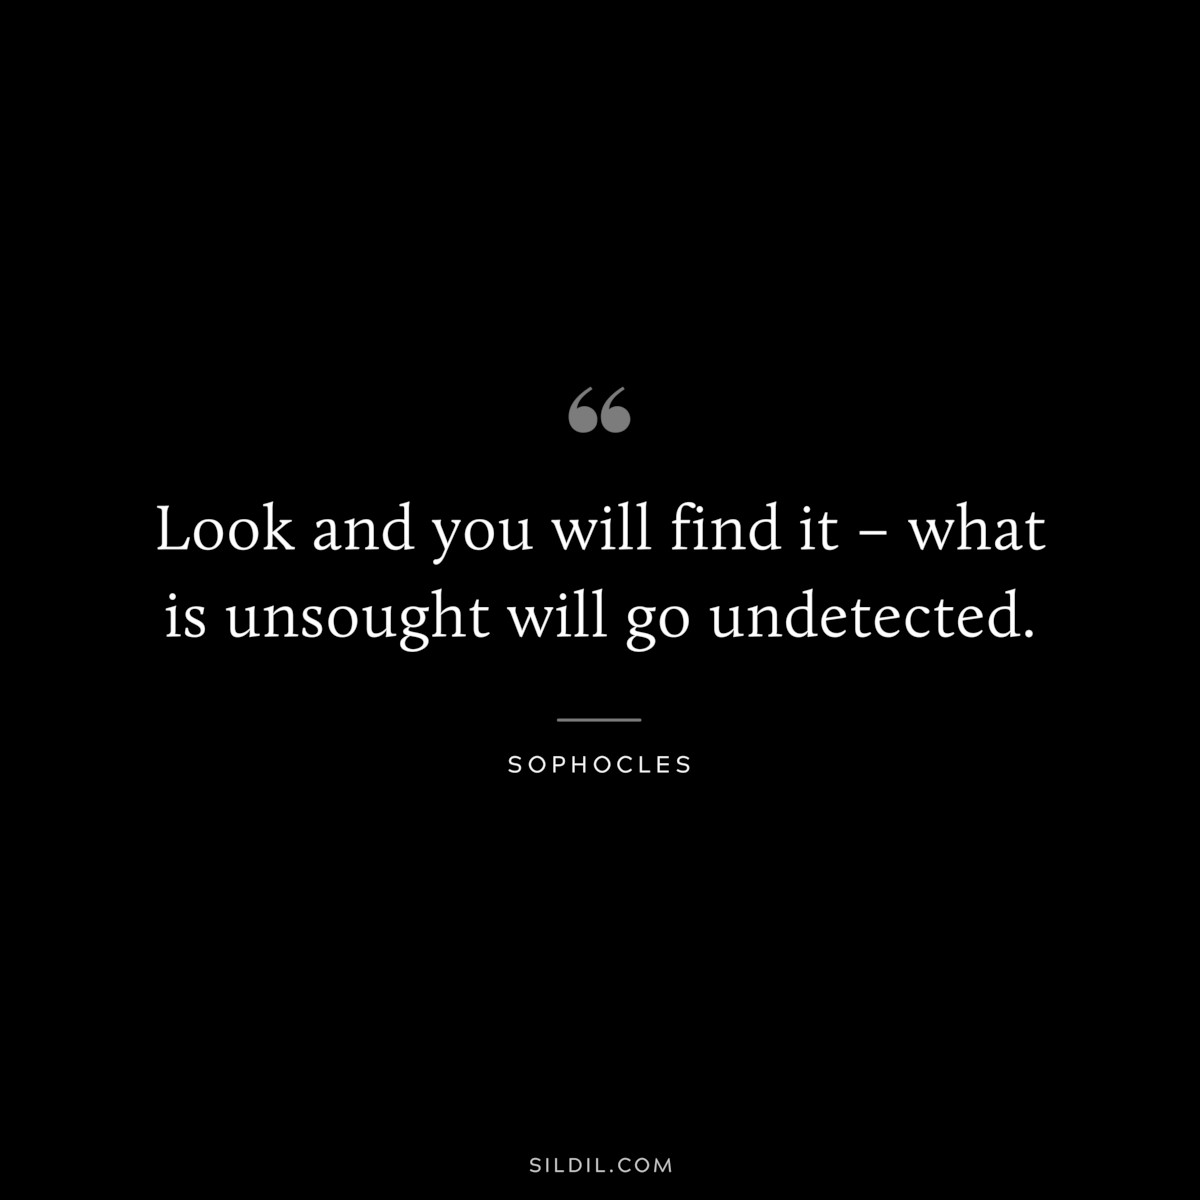 Look and you will find it – what is unsought will go undetected. ― Sophocles